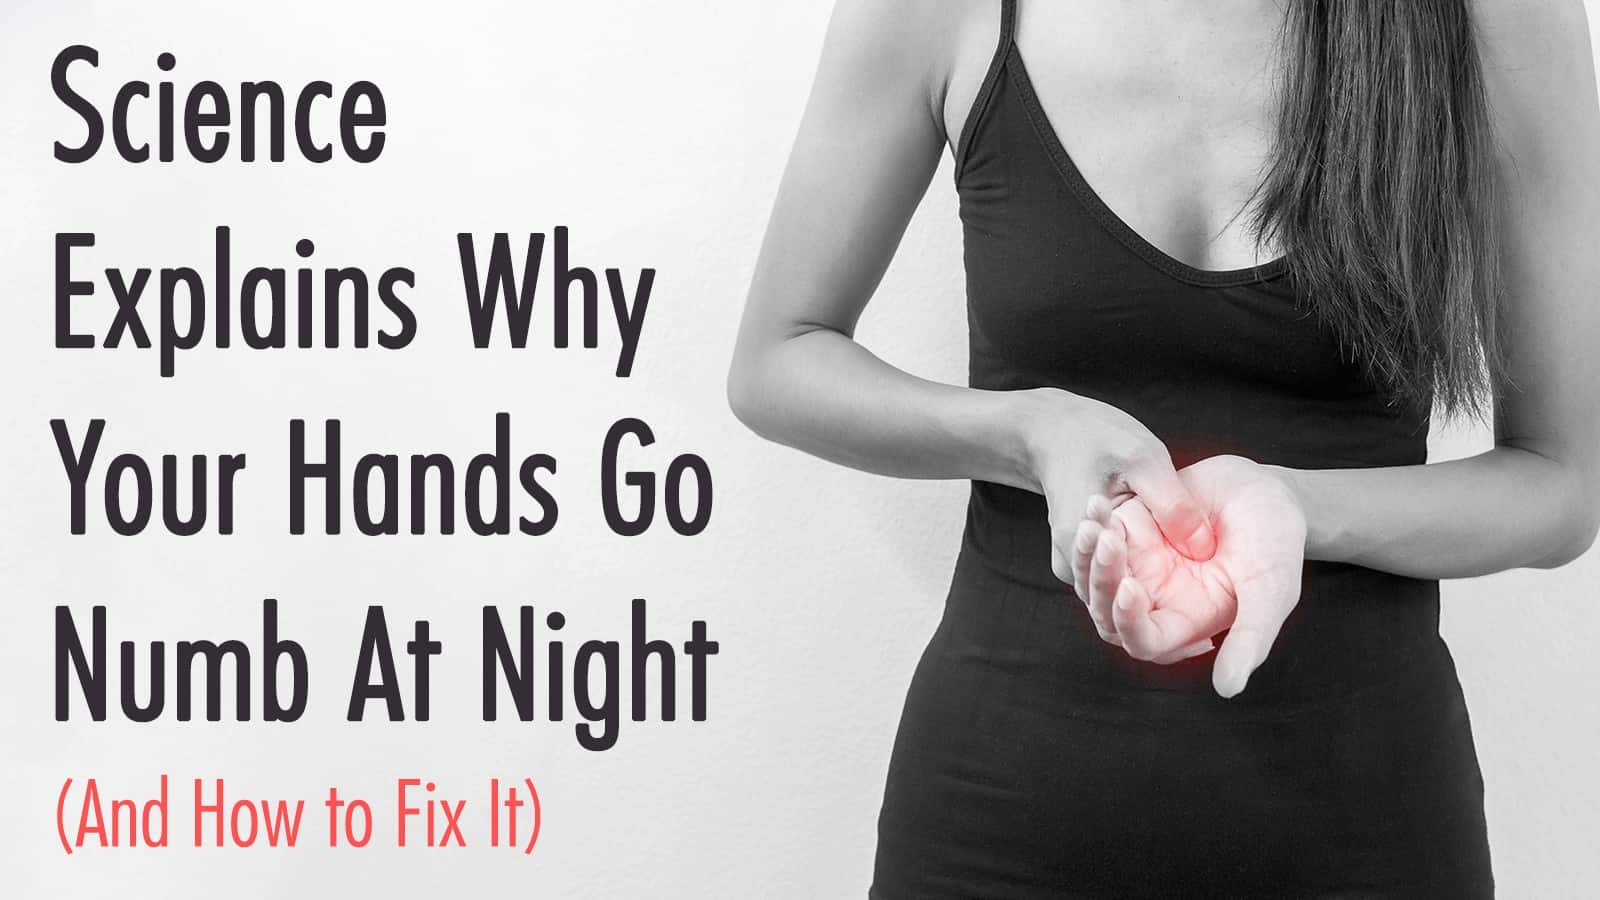 Science Explains Why Your Hands Go Numb At Night (And How to Fix It)